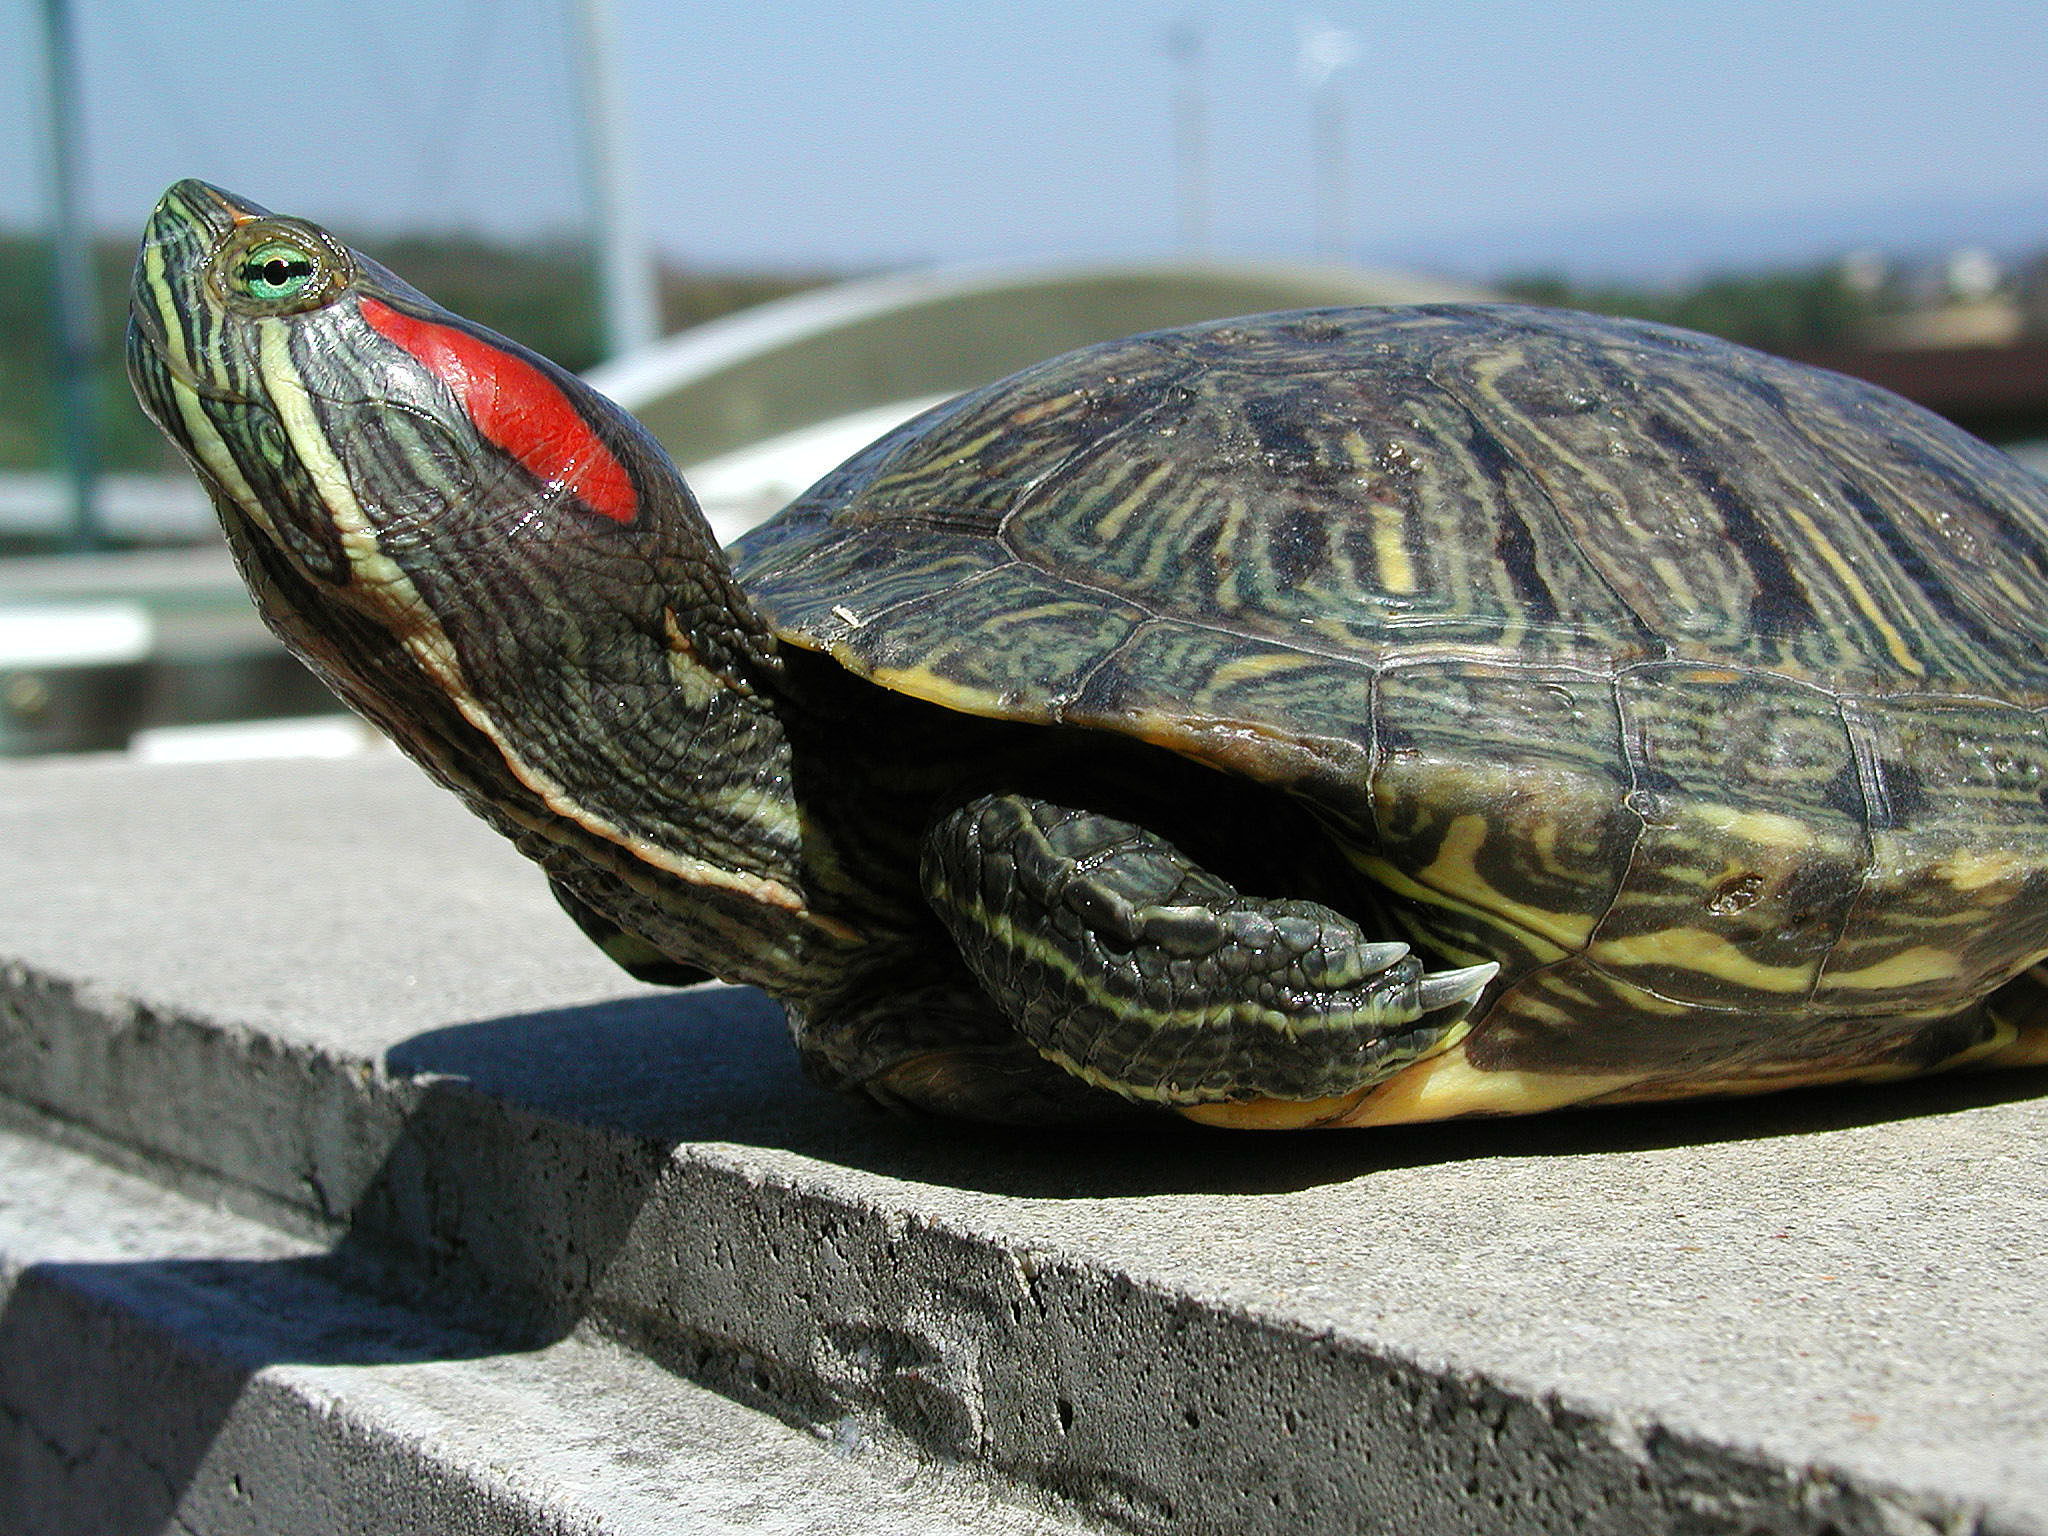 Where Are Red Eared Slider Turtles From? 2